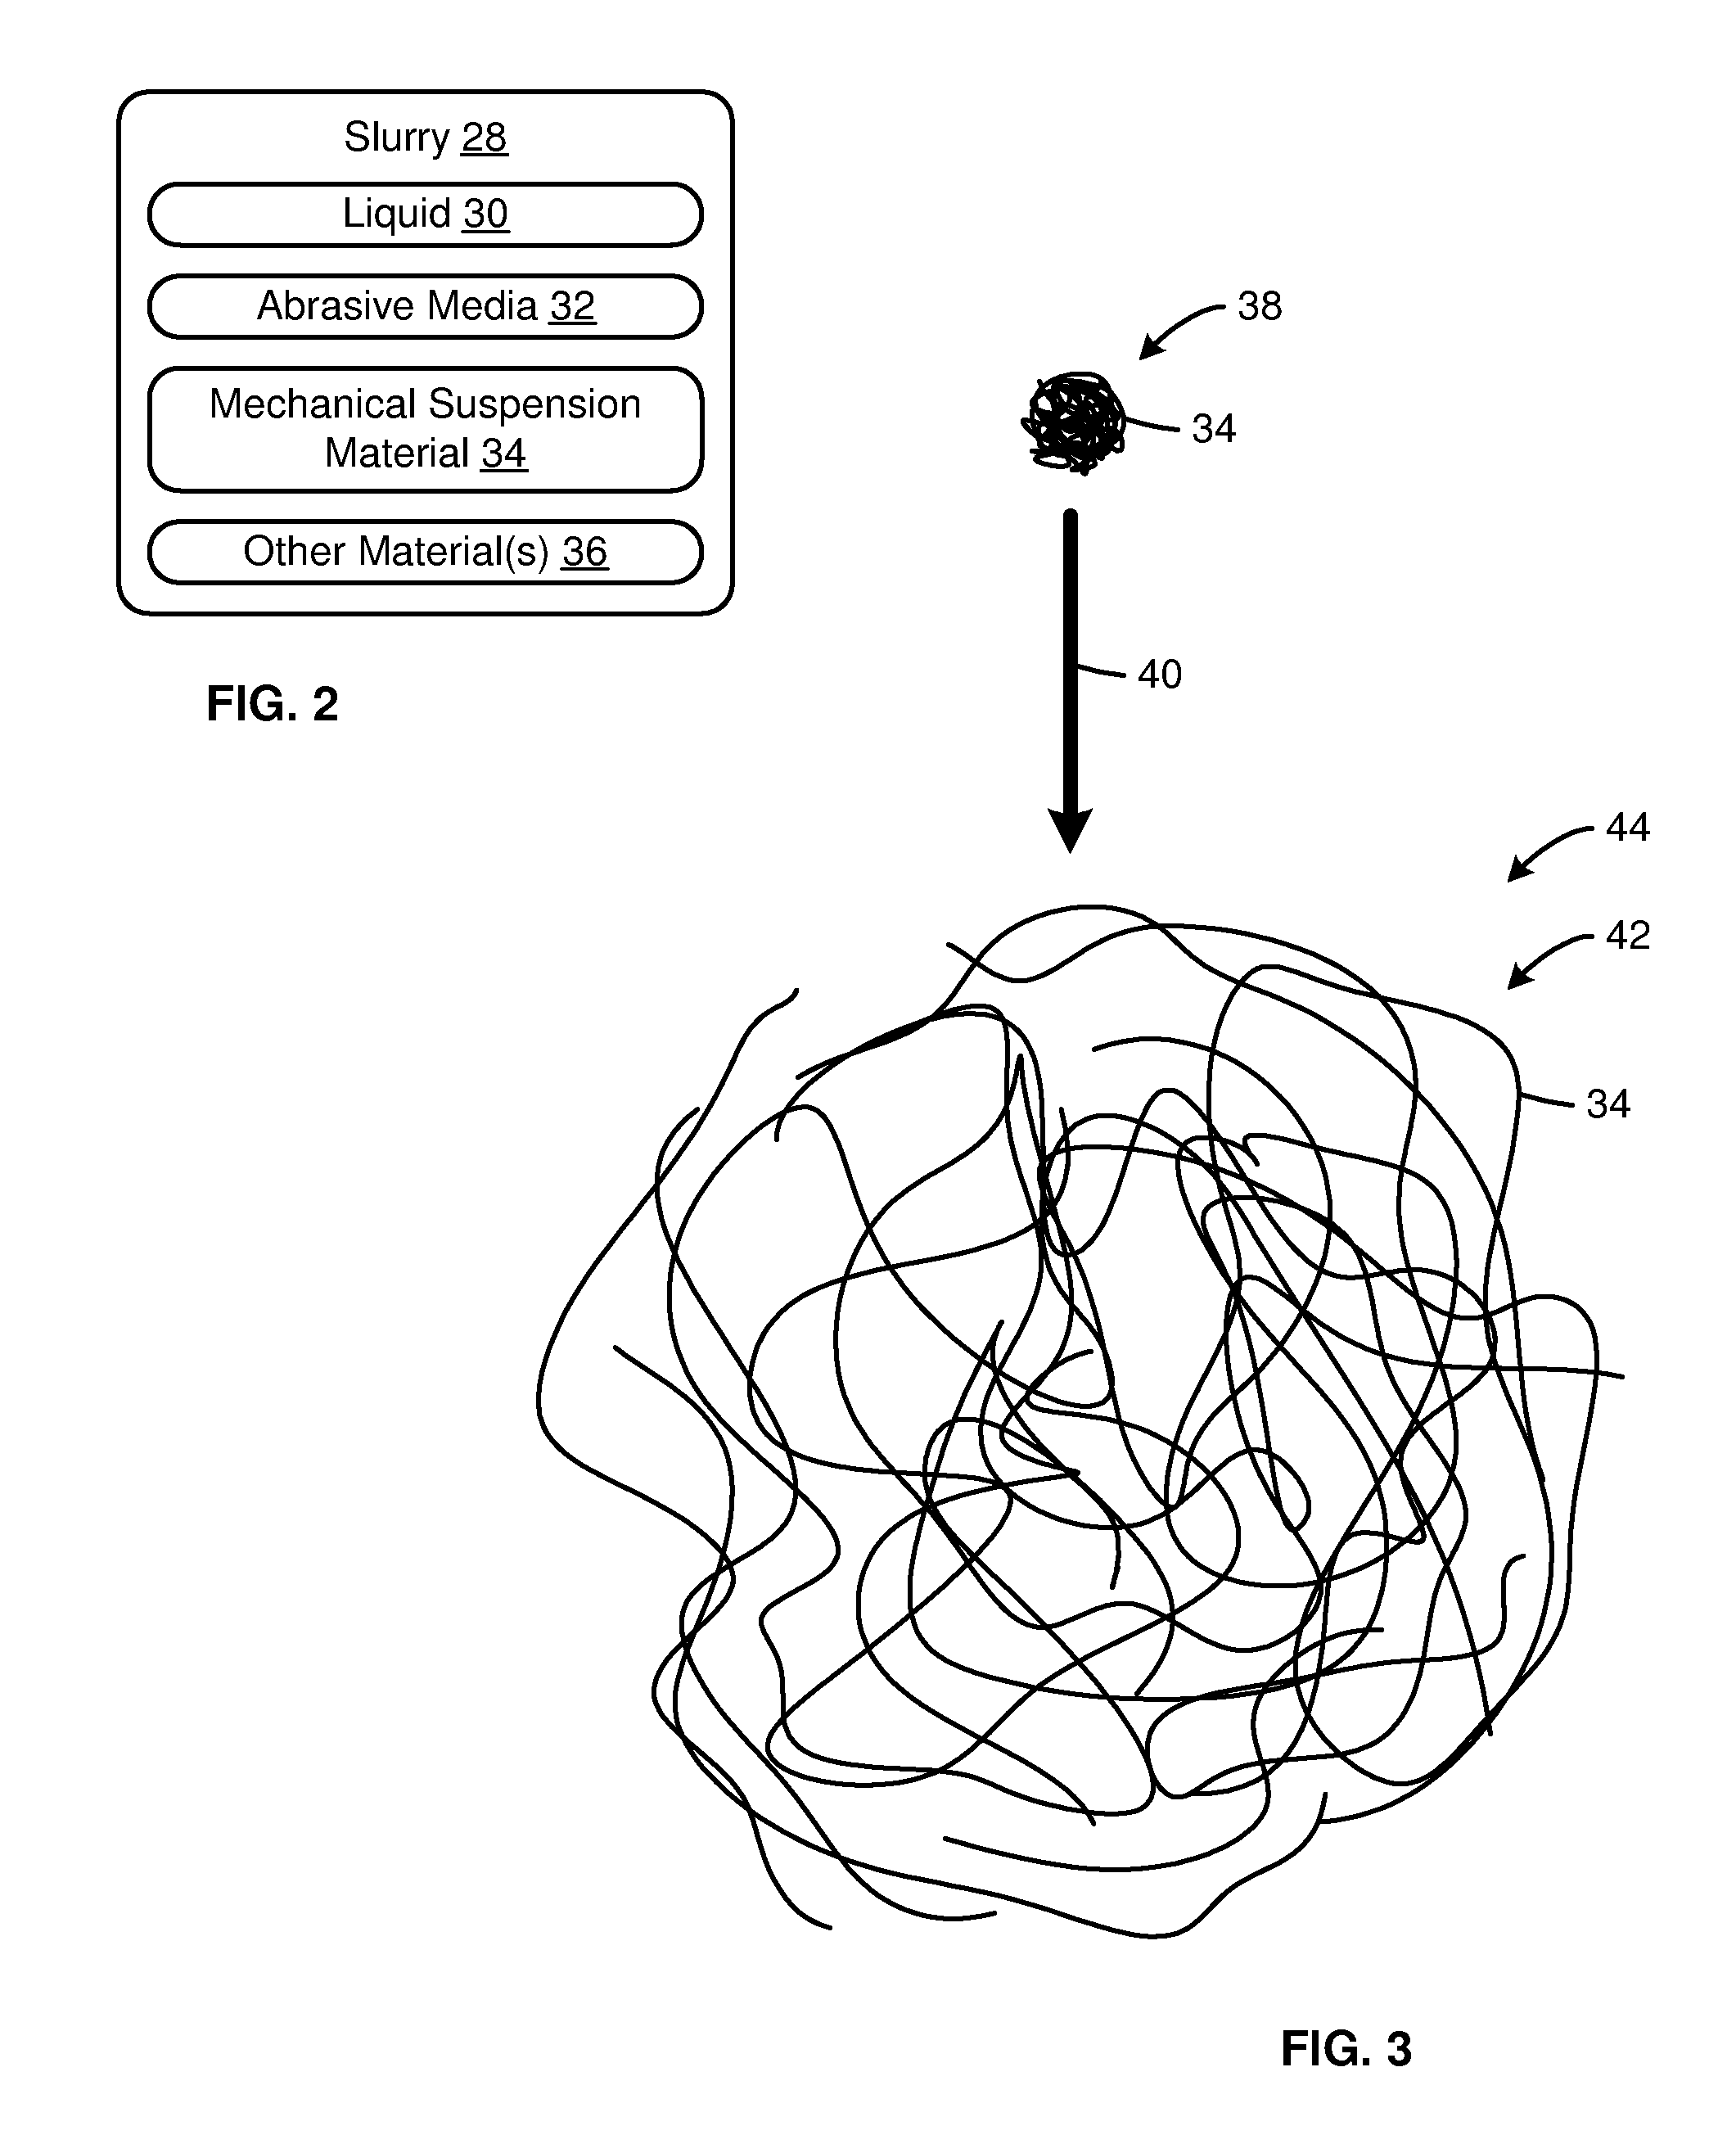 Stabilized, water-jet slurry apparatus and method